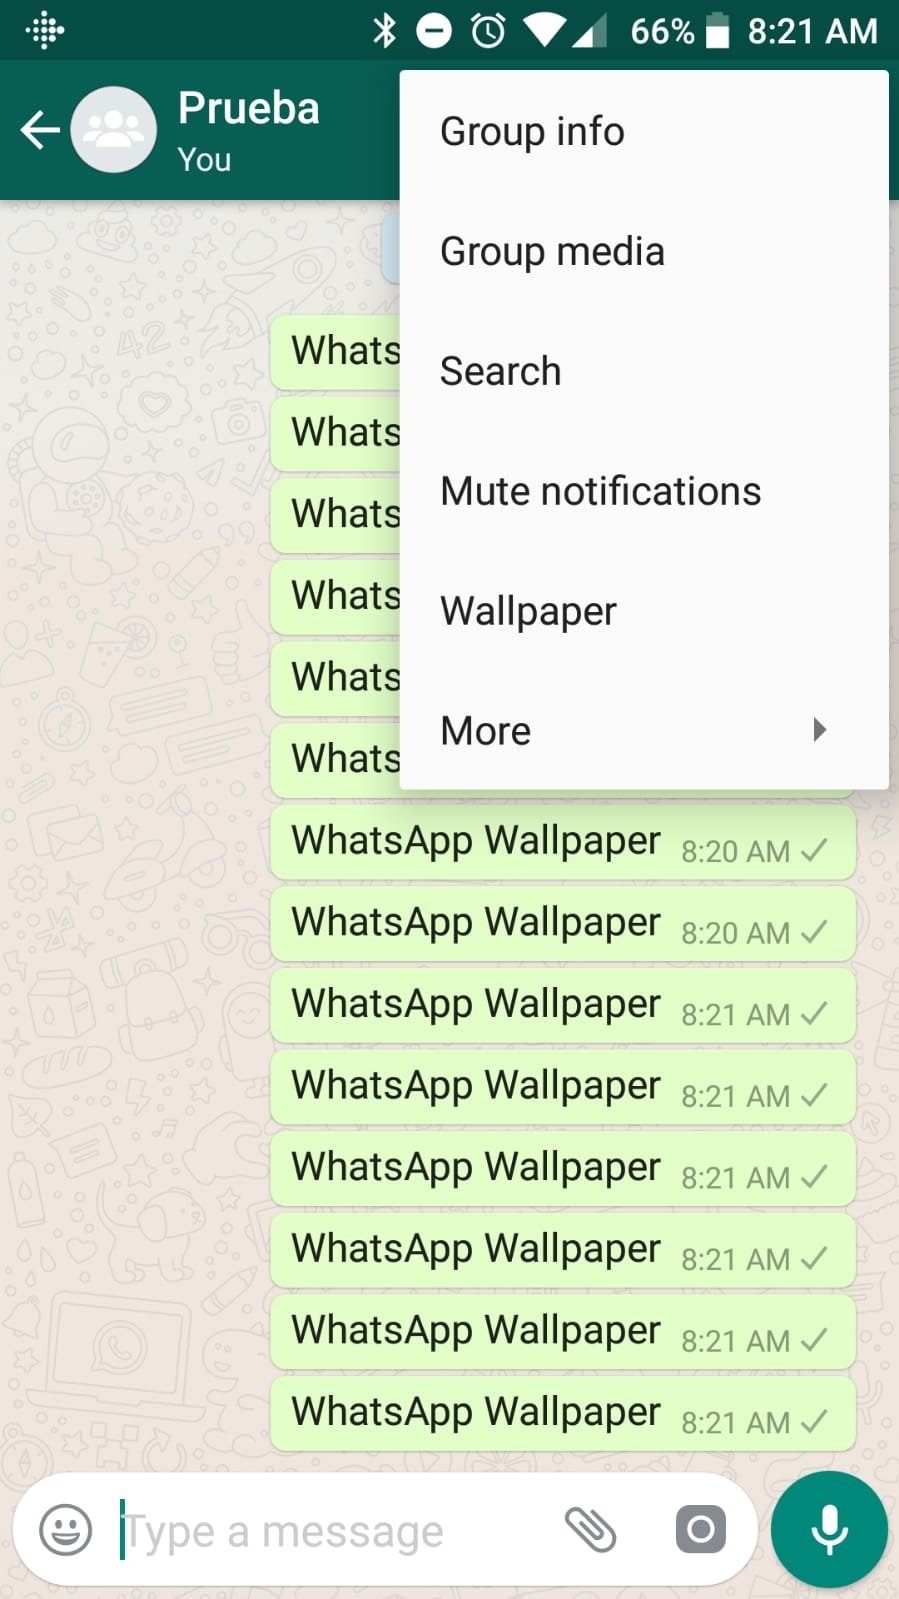 100+] Whatsapp Chat Wallpapers | Wallpapers.com